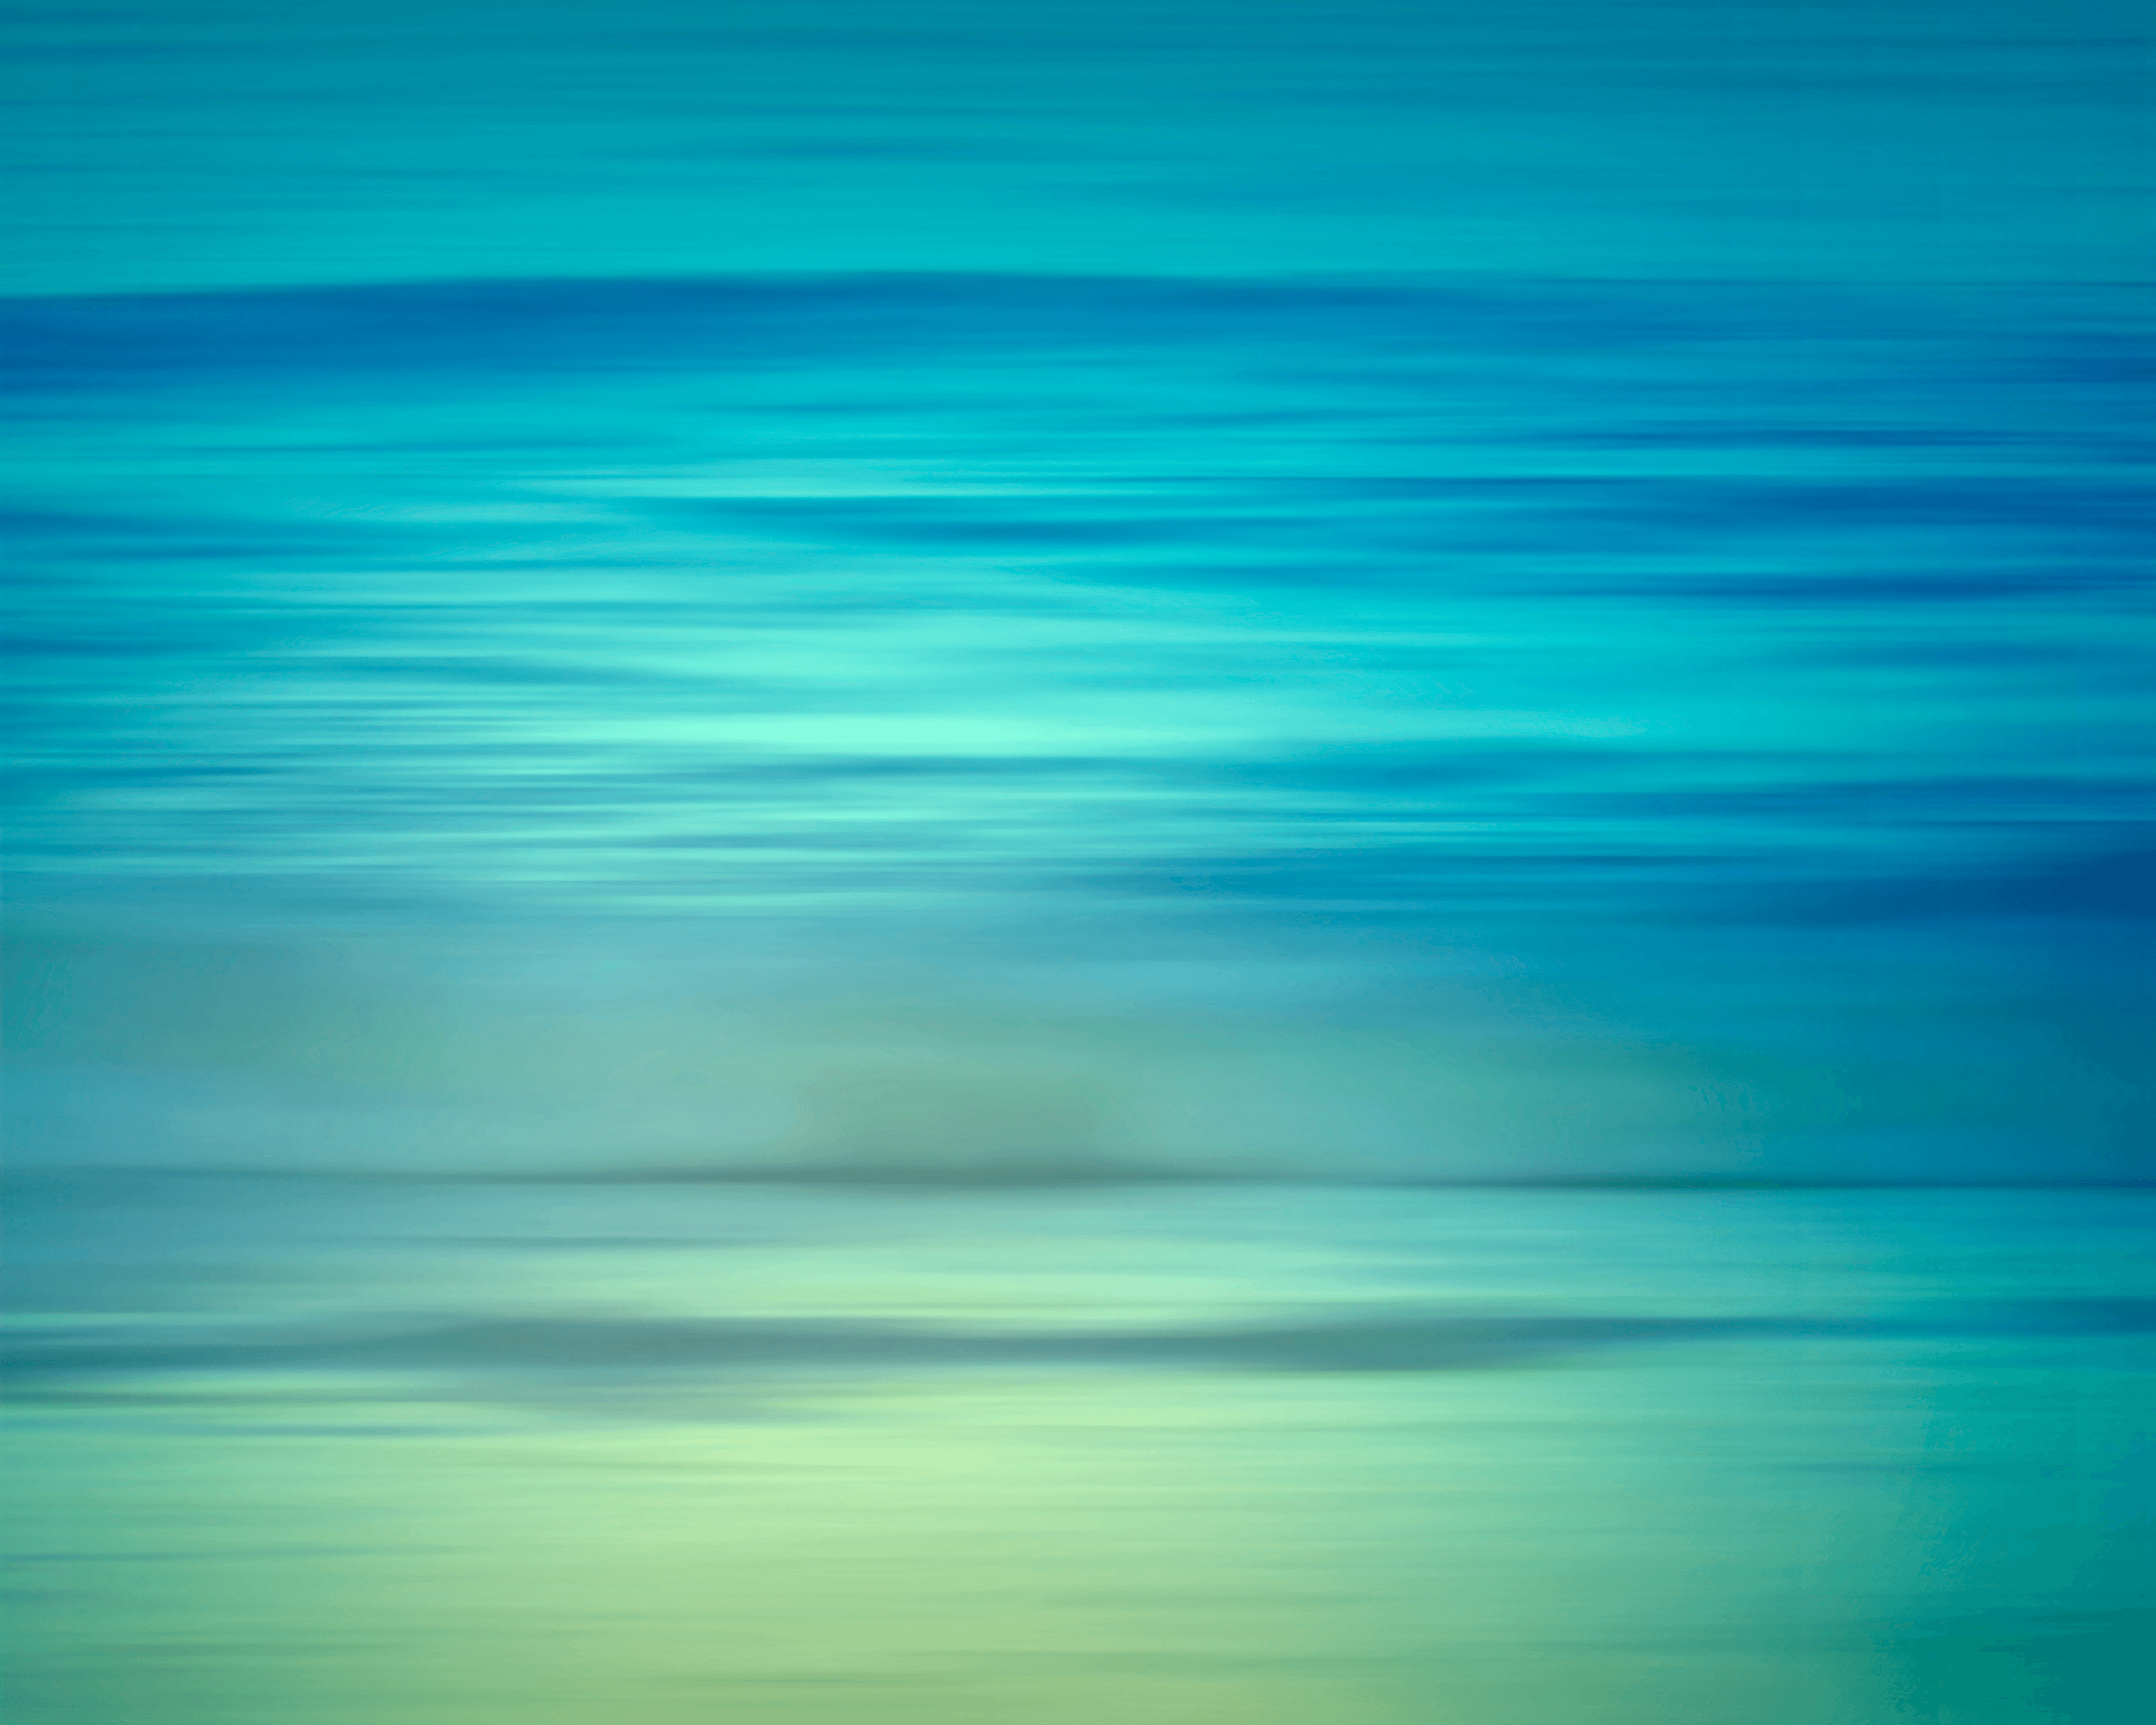 Shades of blue 1/3